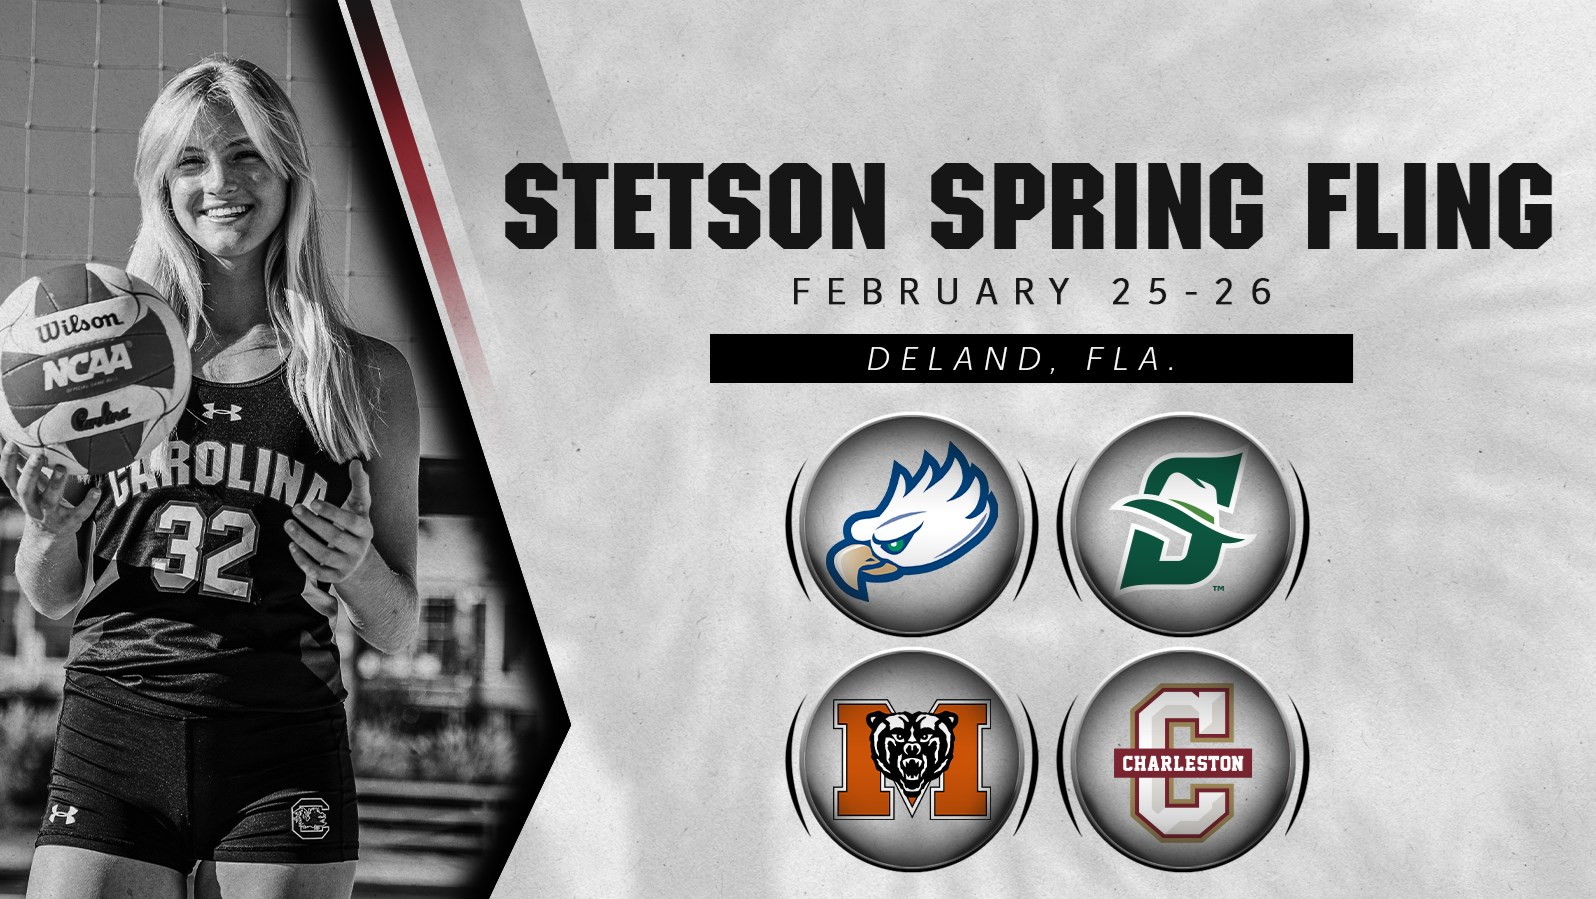 Beach Volleyball Begins 2022 Campaign at the Stetson Spring Fling